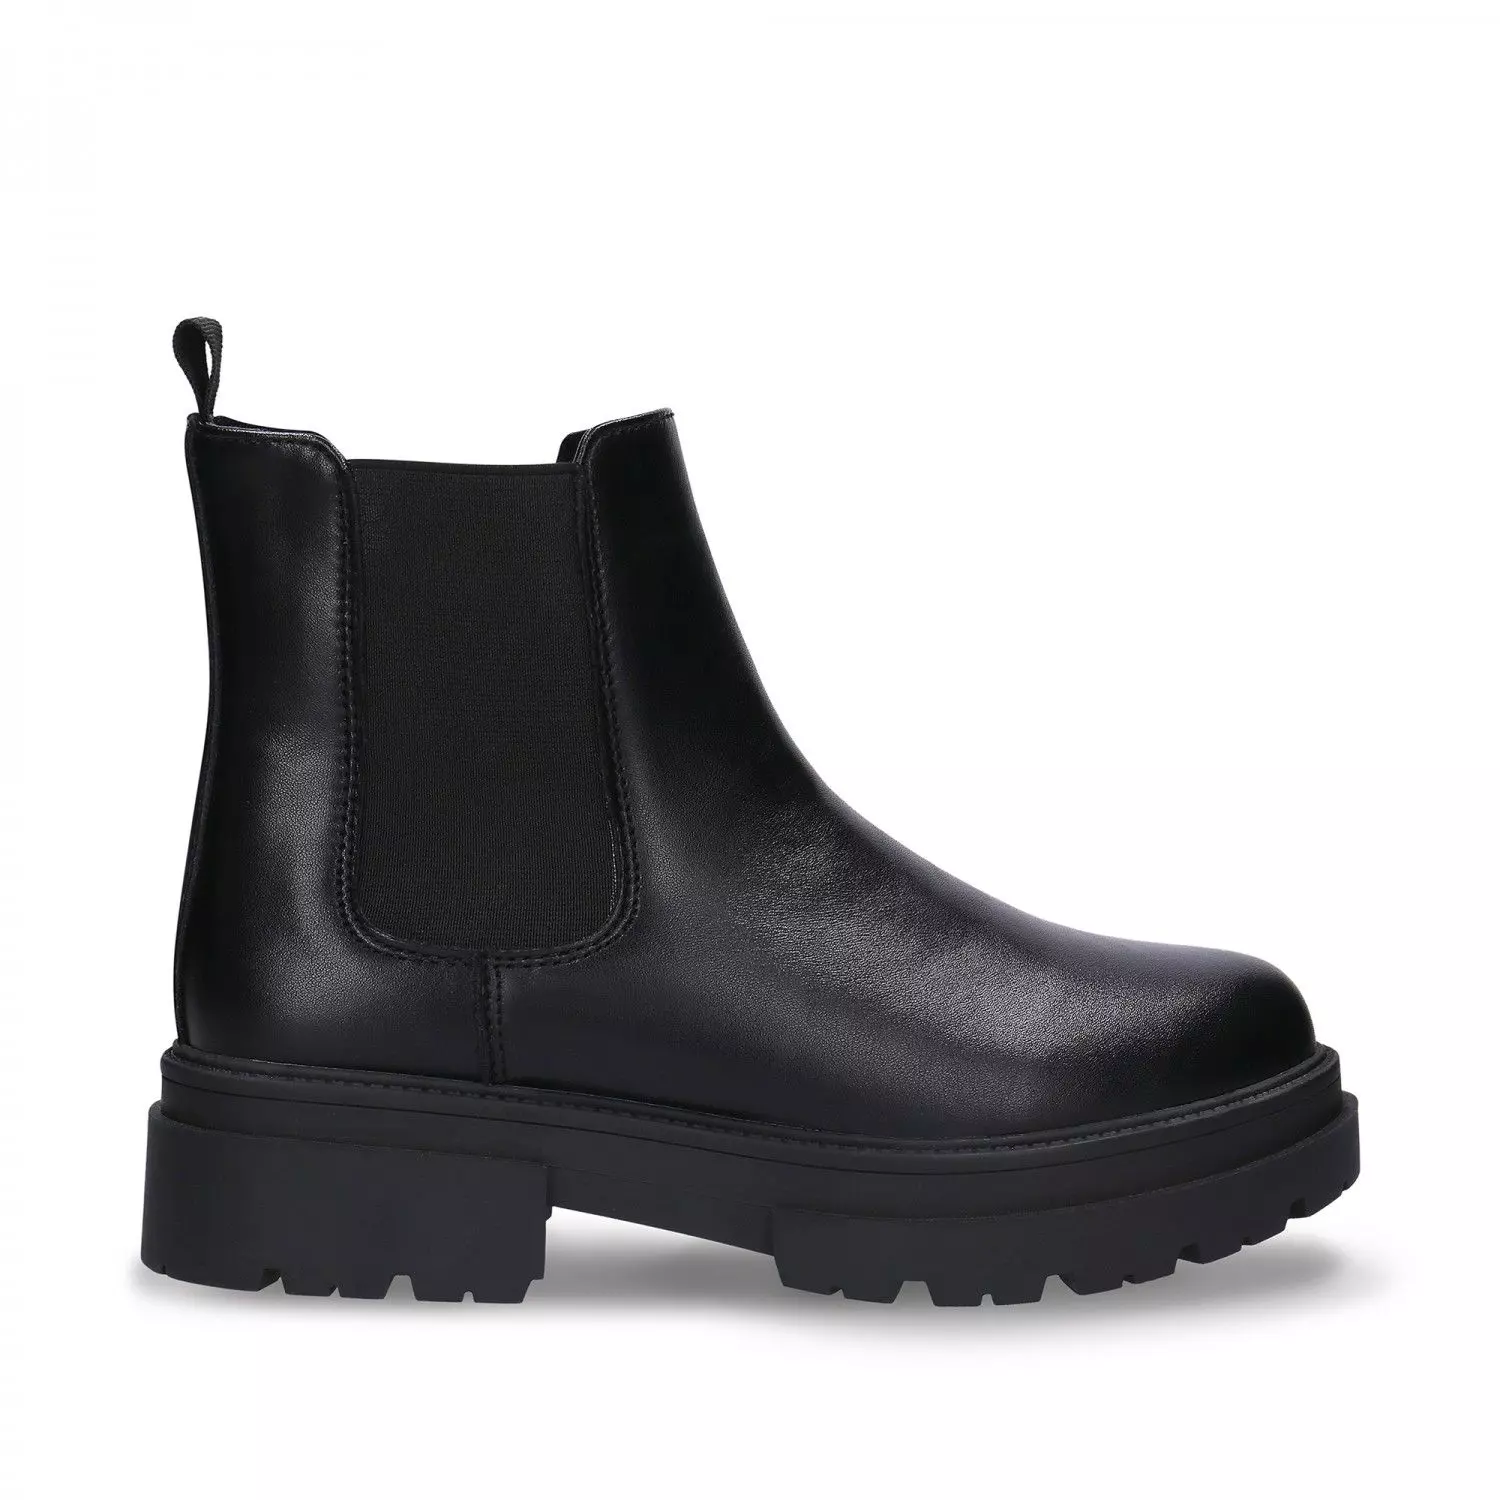 Chelsea-Boots Modell: Rebe